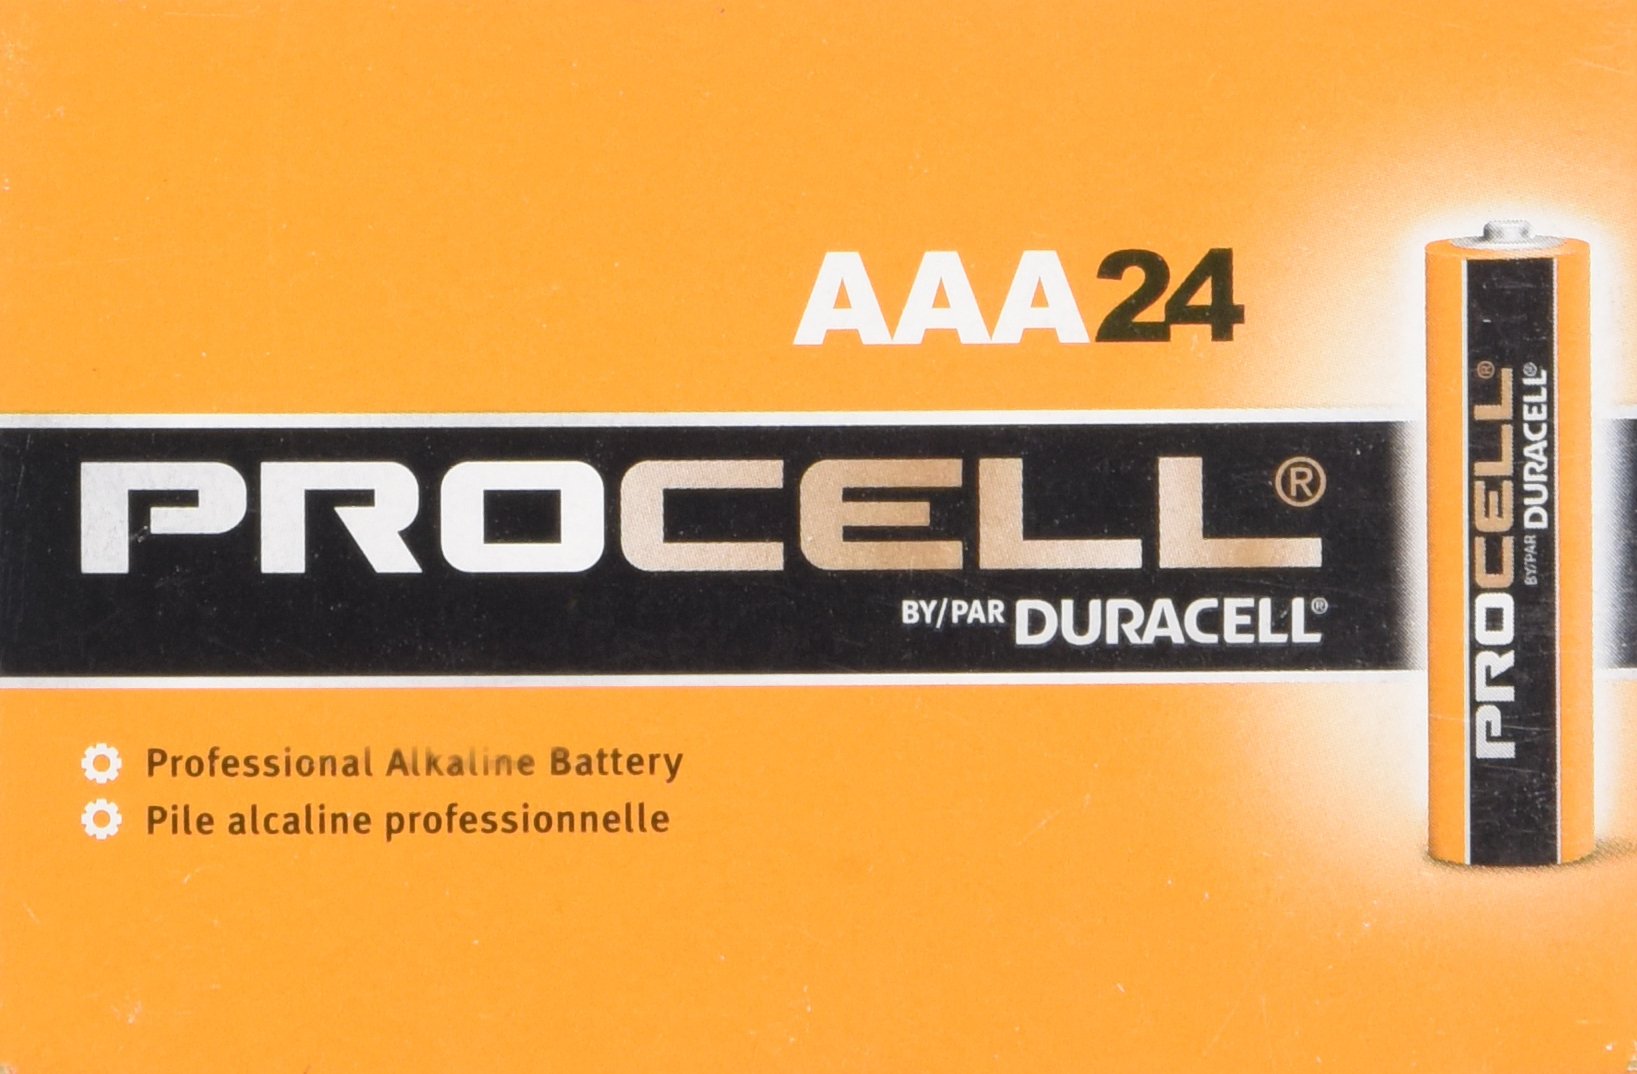 Duracell 32-MA92-DH0O Procell Alkaline Battery, AAA (Pack of 24), Packaging May Vary